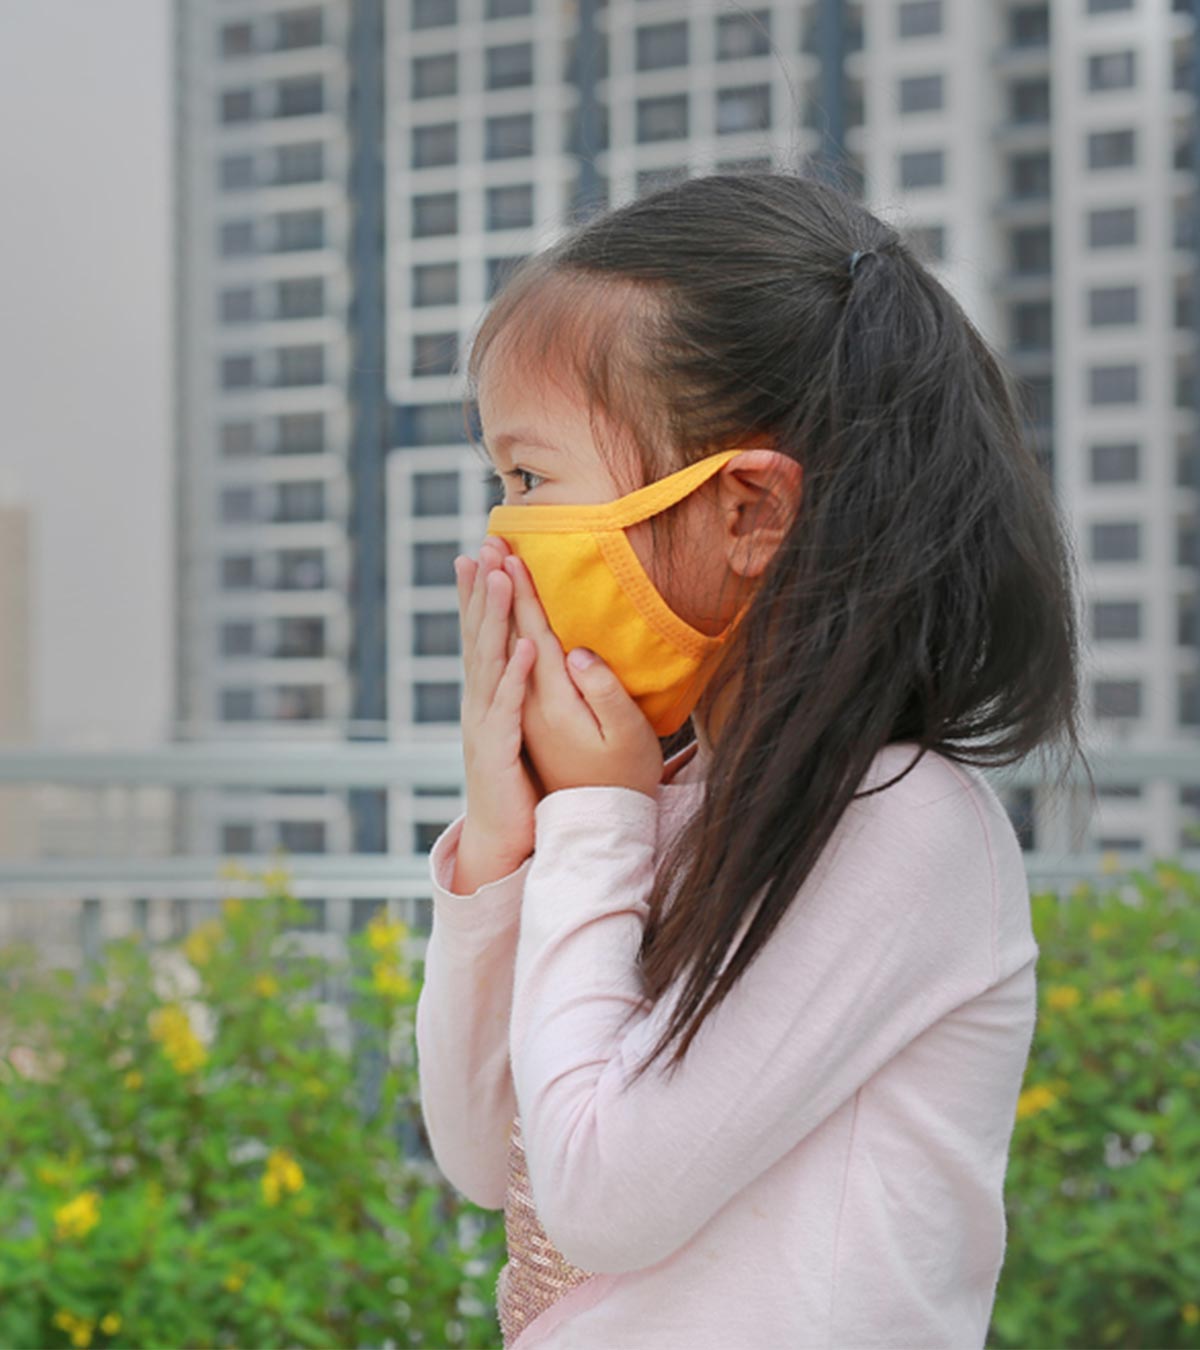 Asthma Isn’t The Only Effect Of Air Pollution On Kids. Their Brains Are At Risk Too.